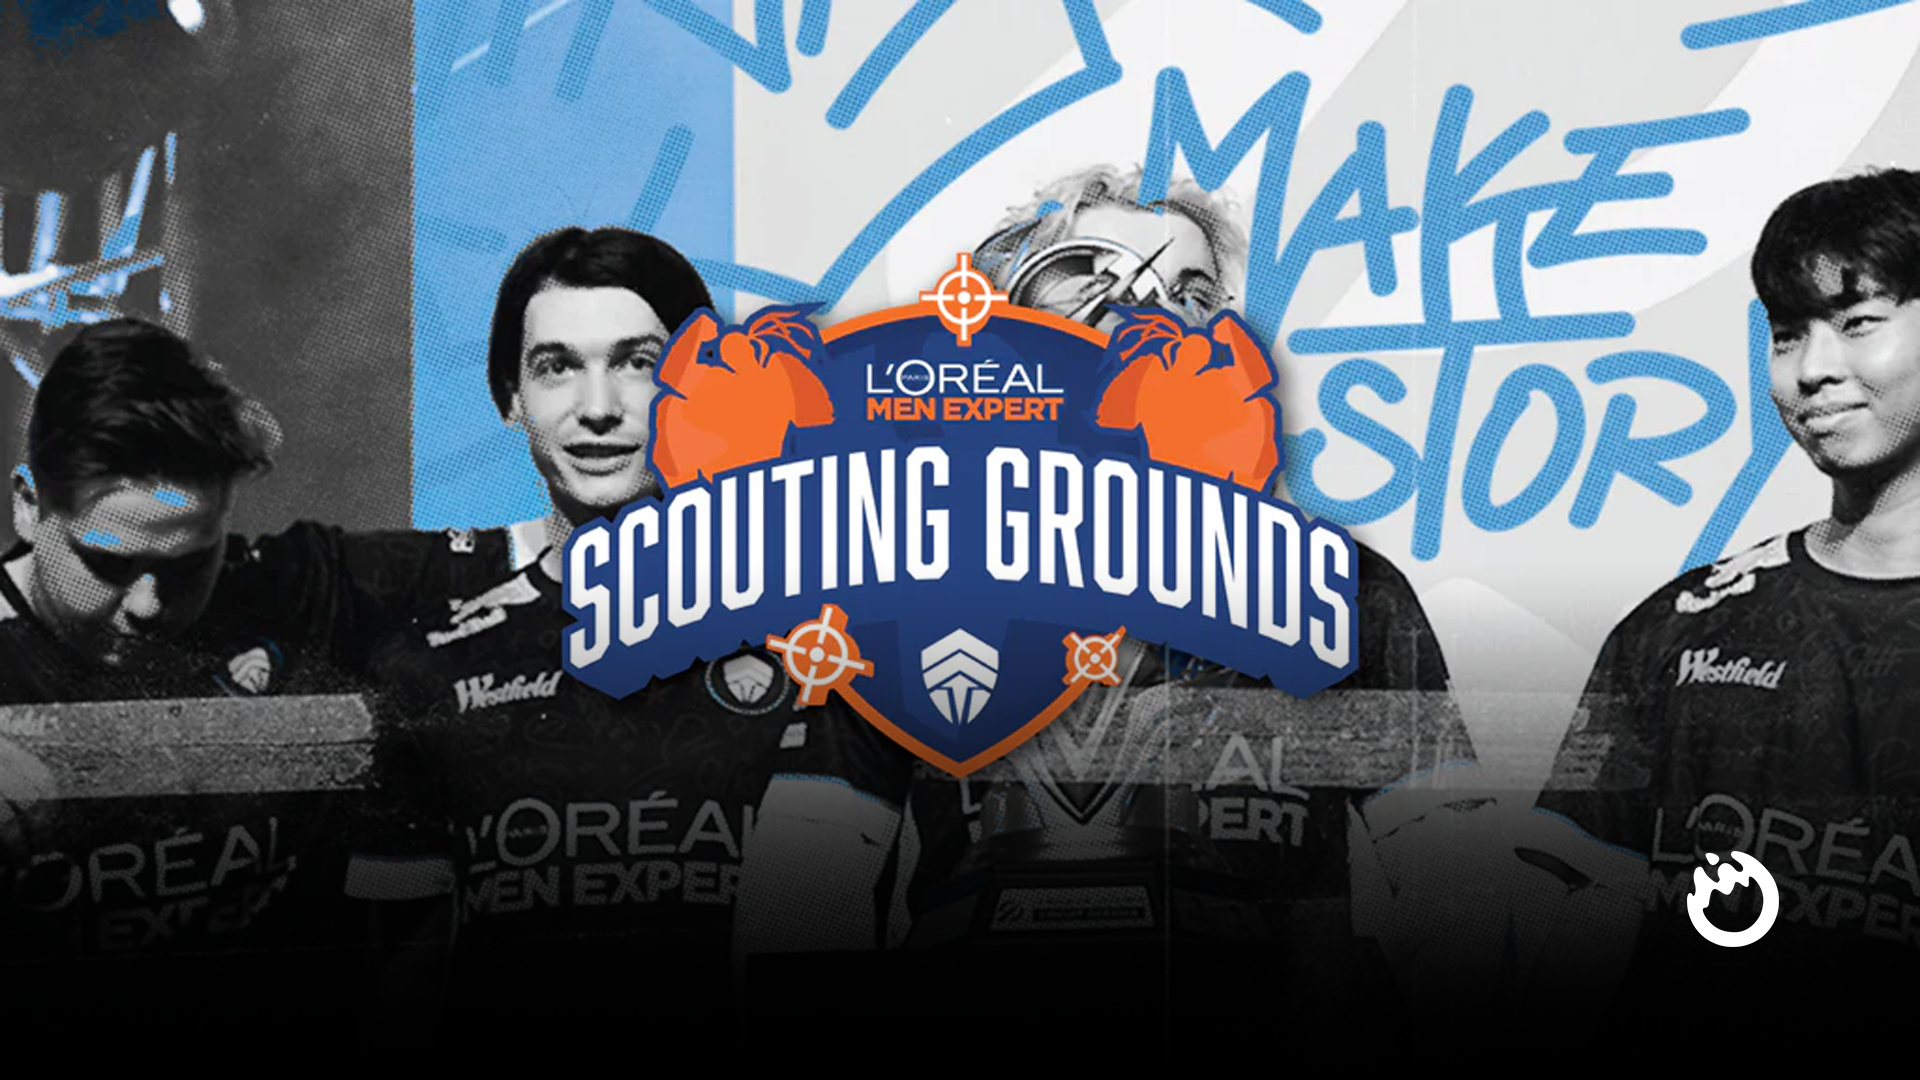 Chiefs lead OCE LoL academy initiative with L'Oreal Men Expert Scouting Grounds